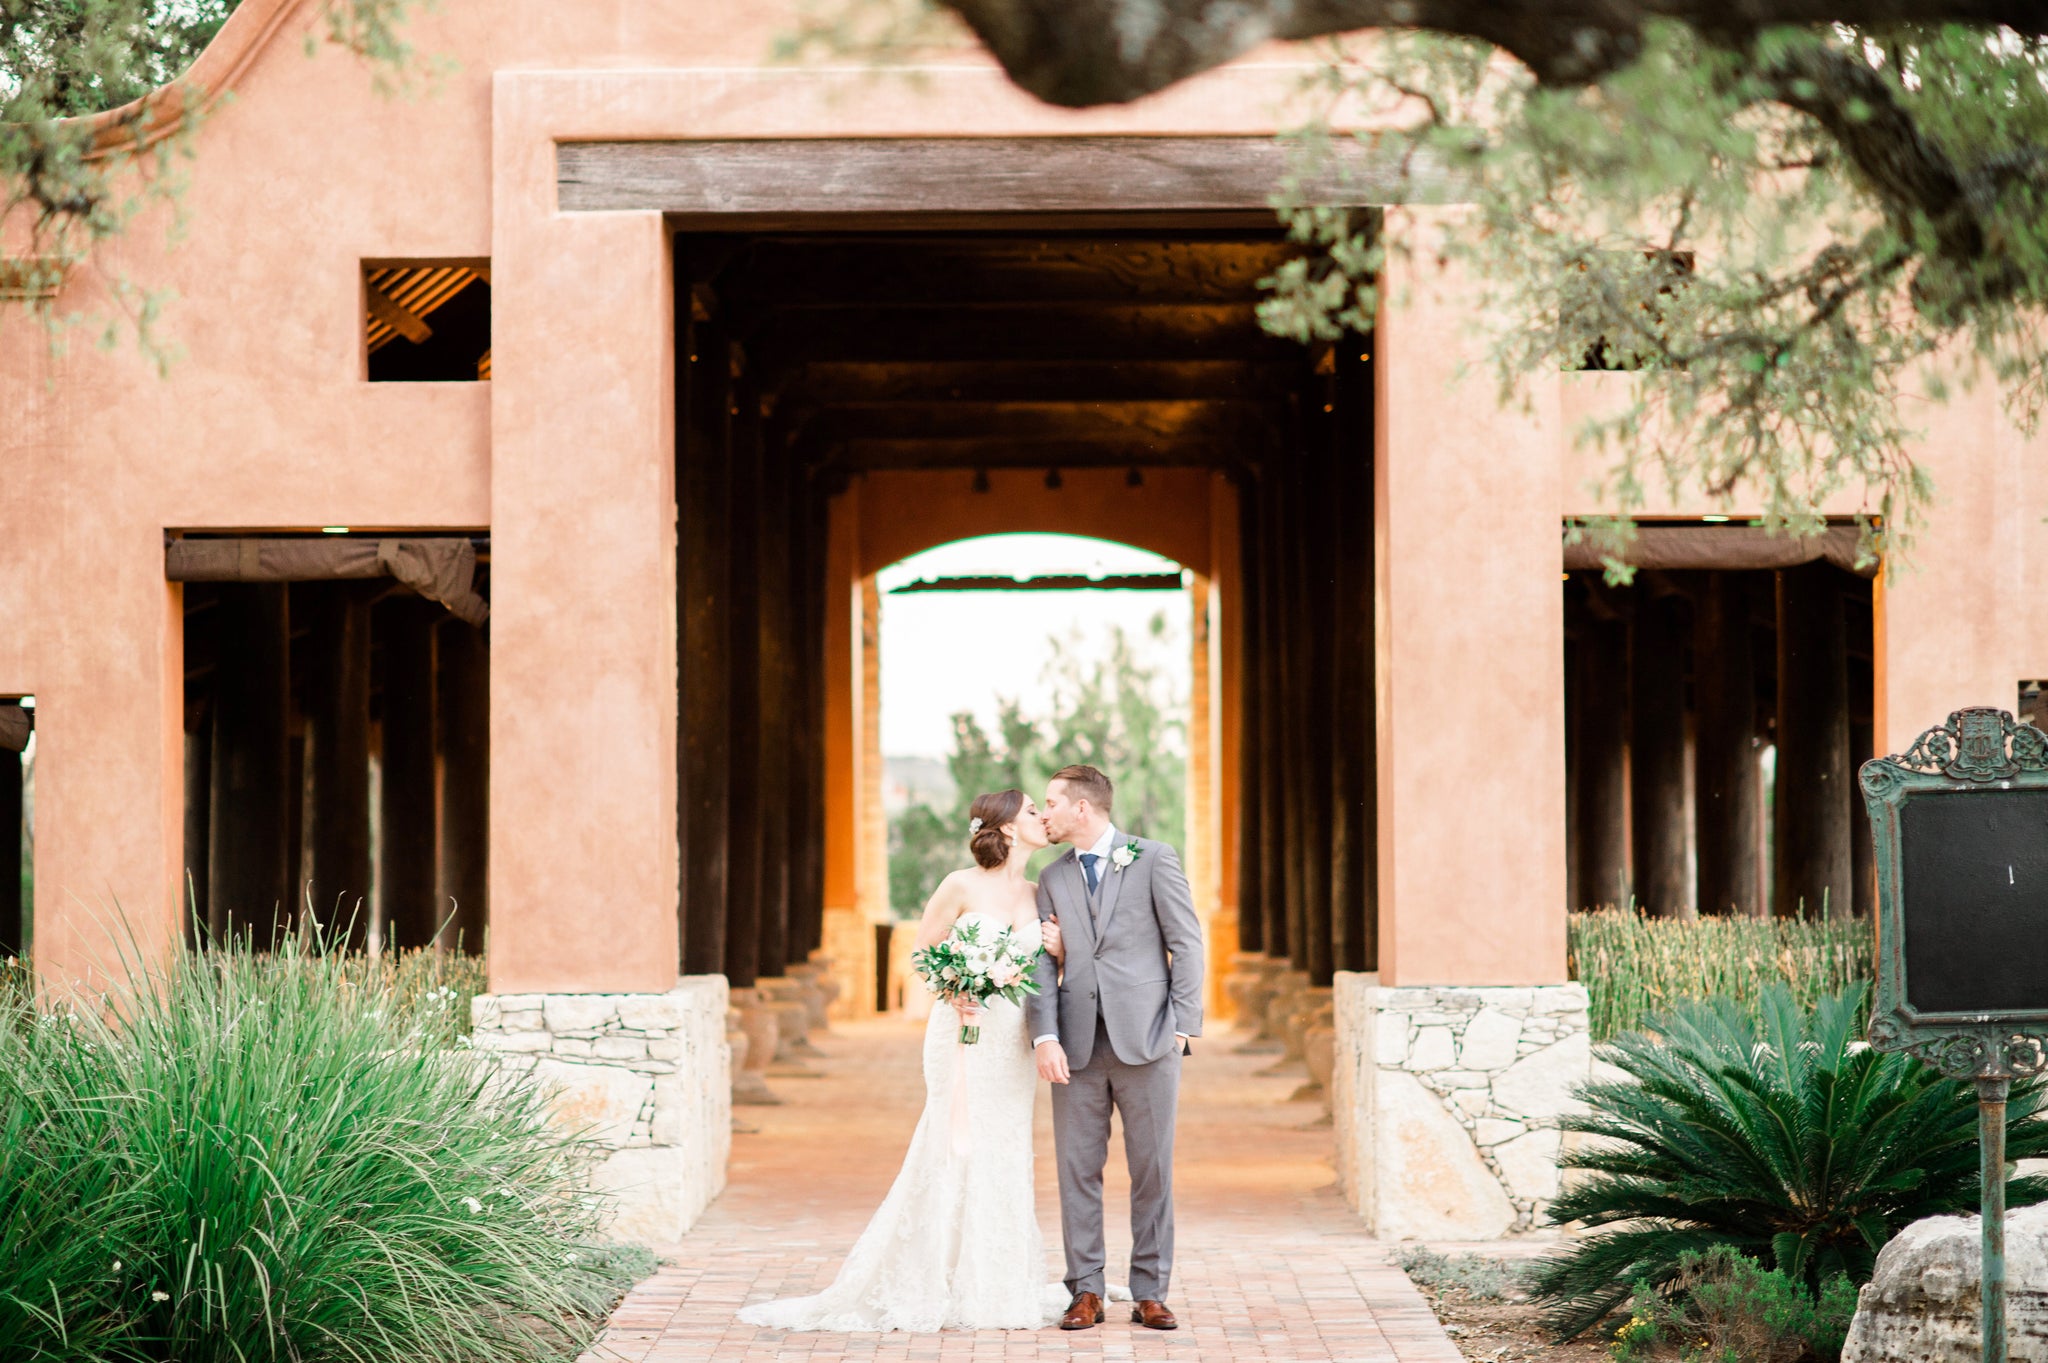 Second Shooter | Wedding Photography - Lindsey Mueller Photography